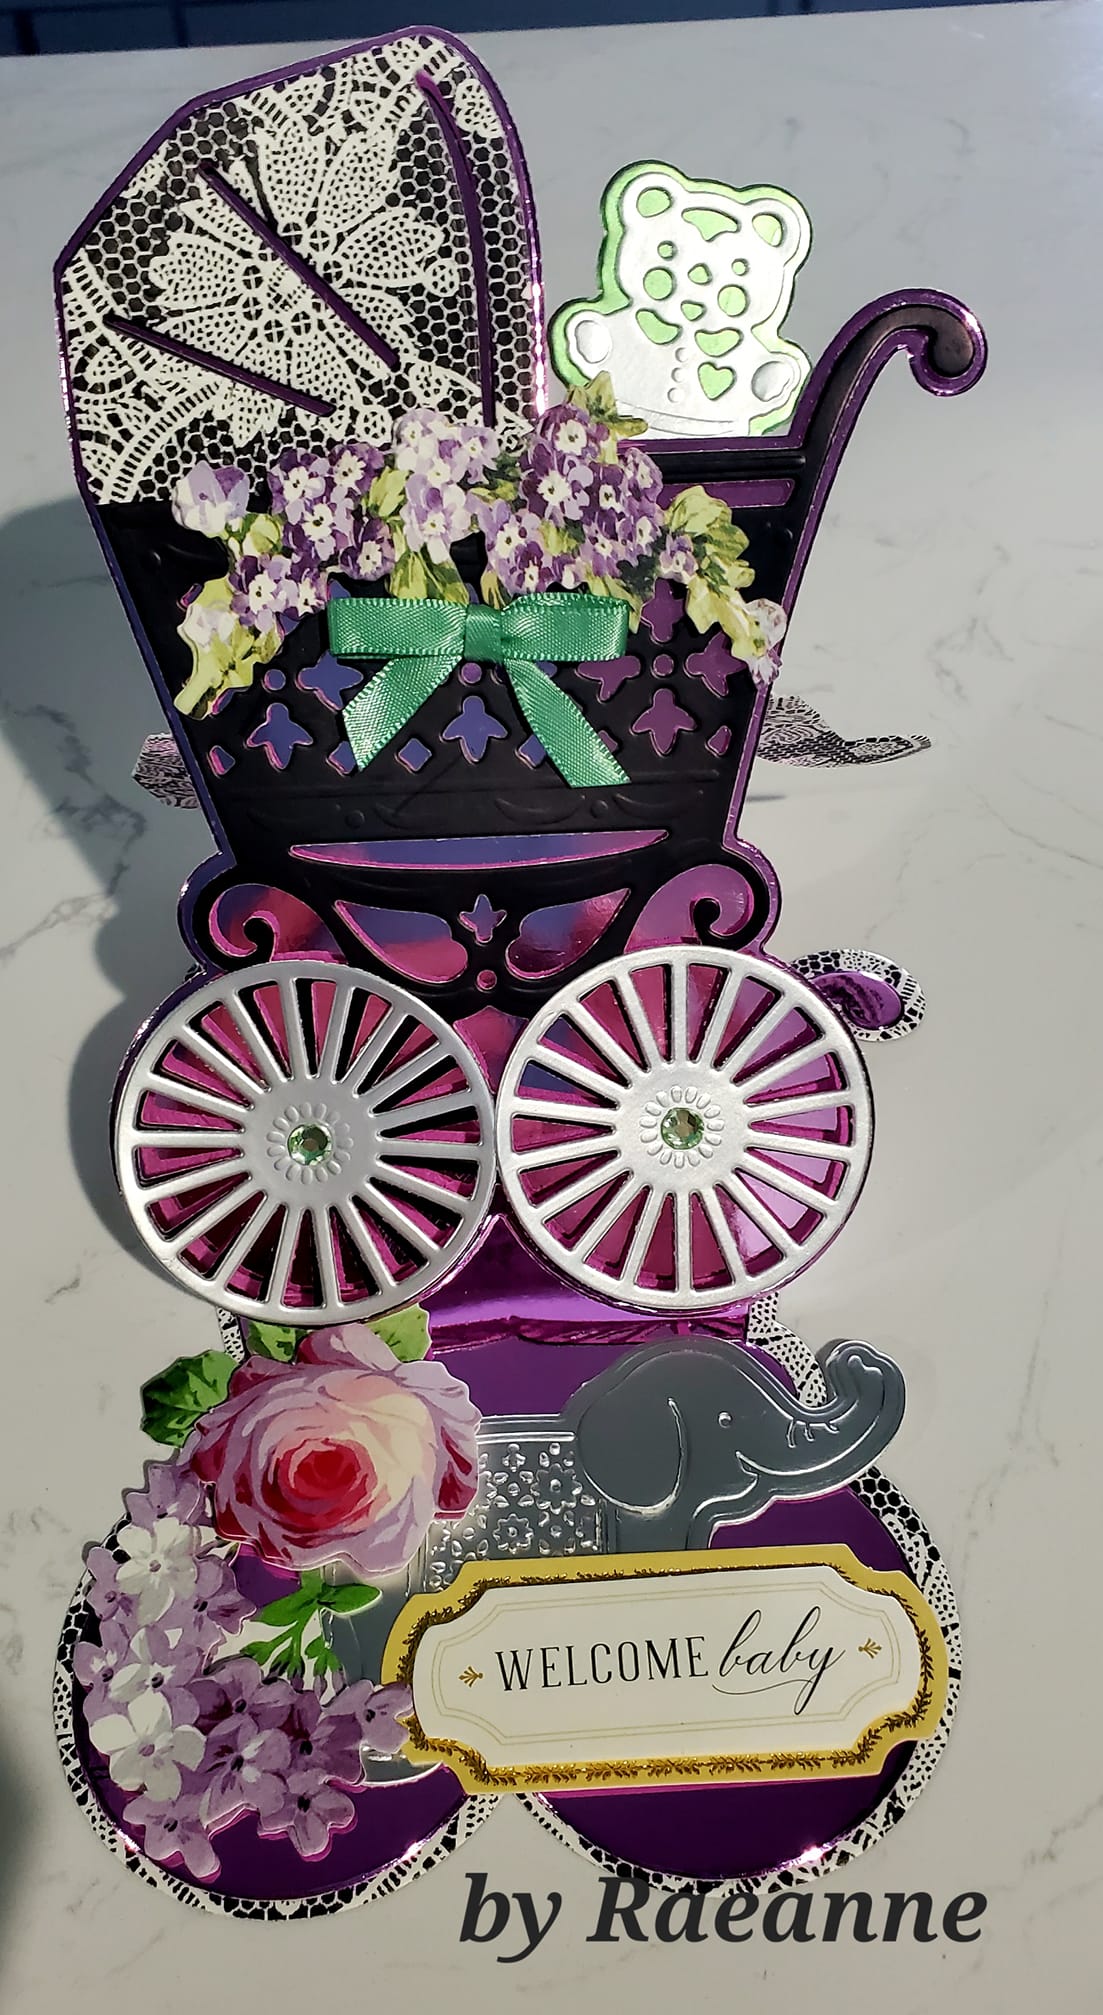 A pop up card with a baby carriage and flowers.